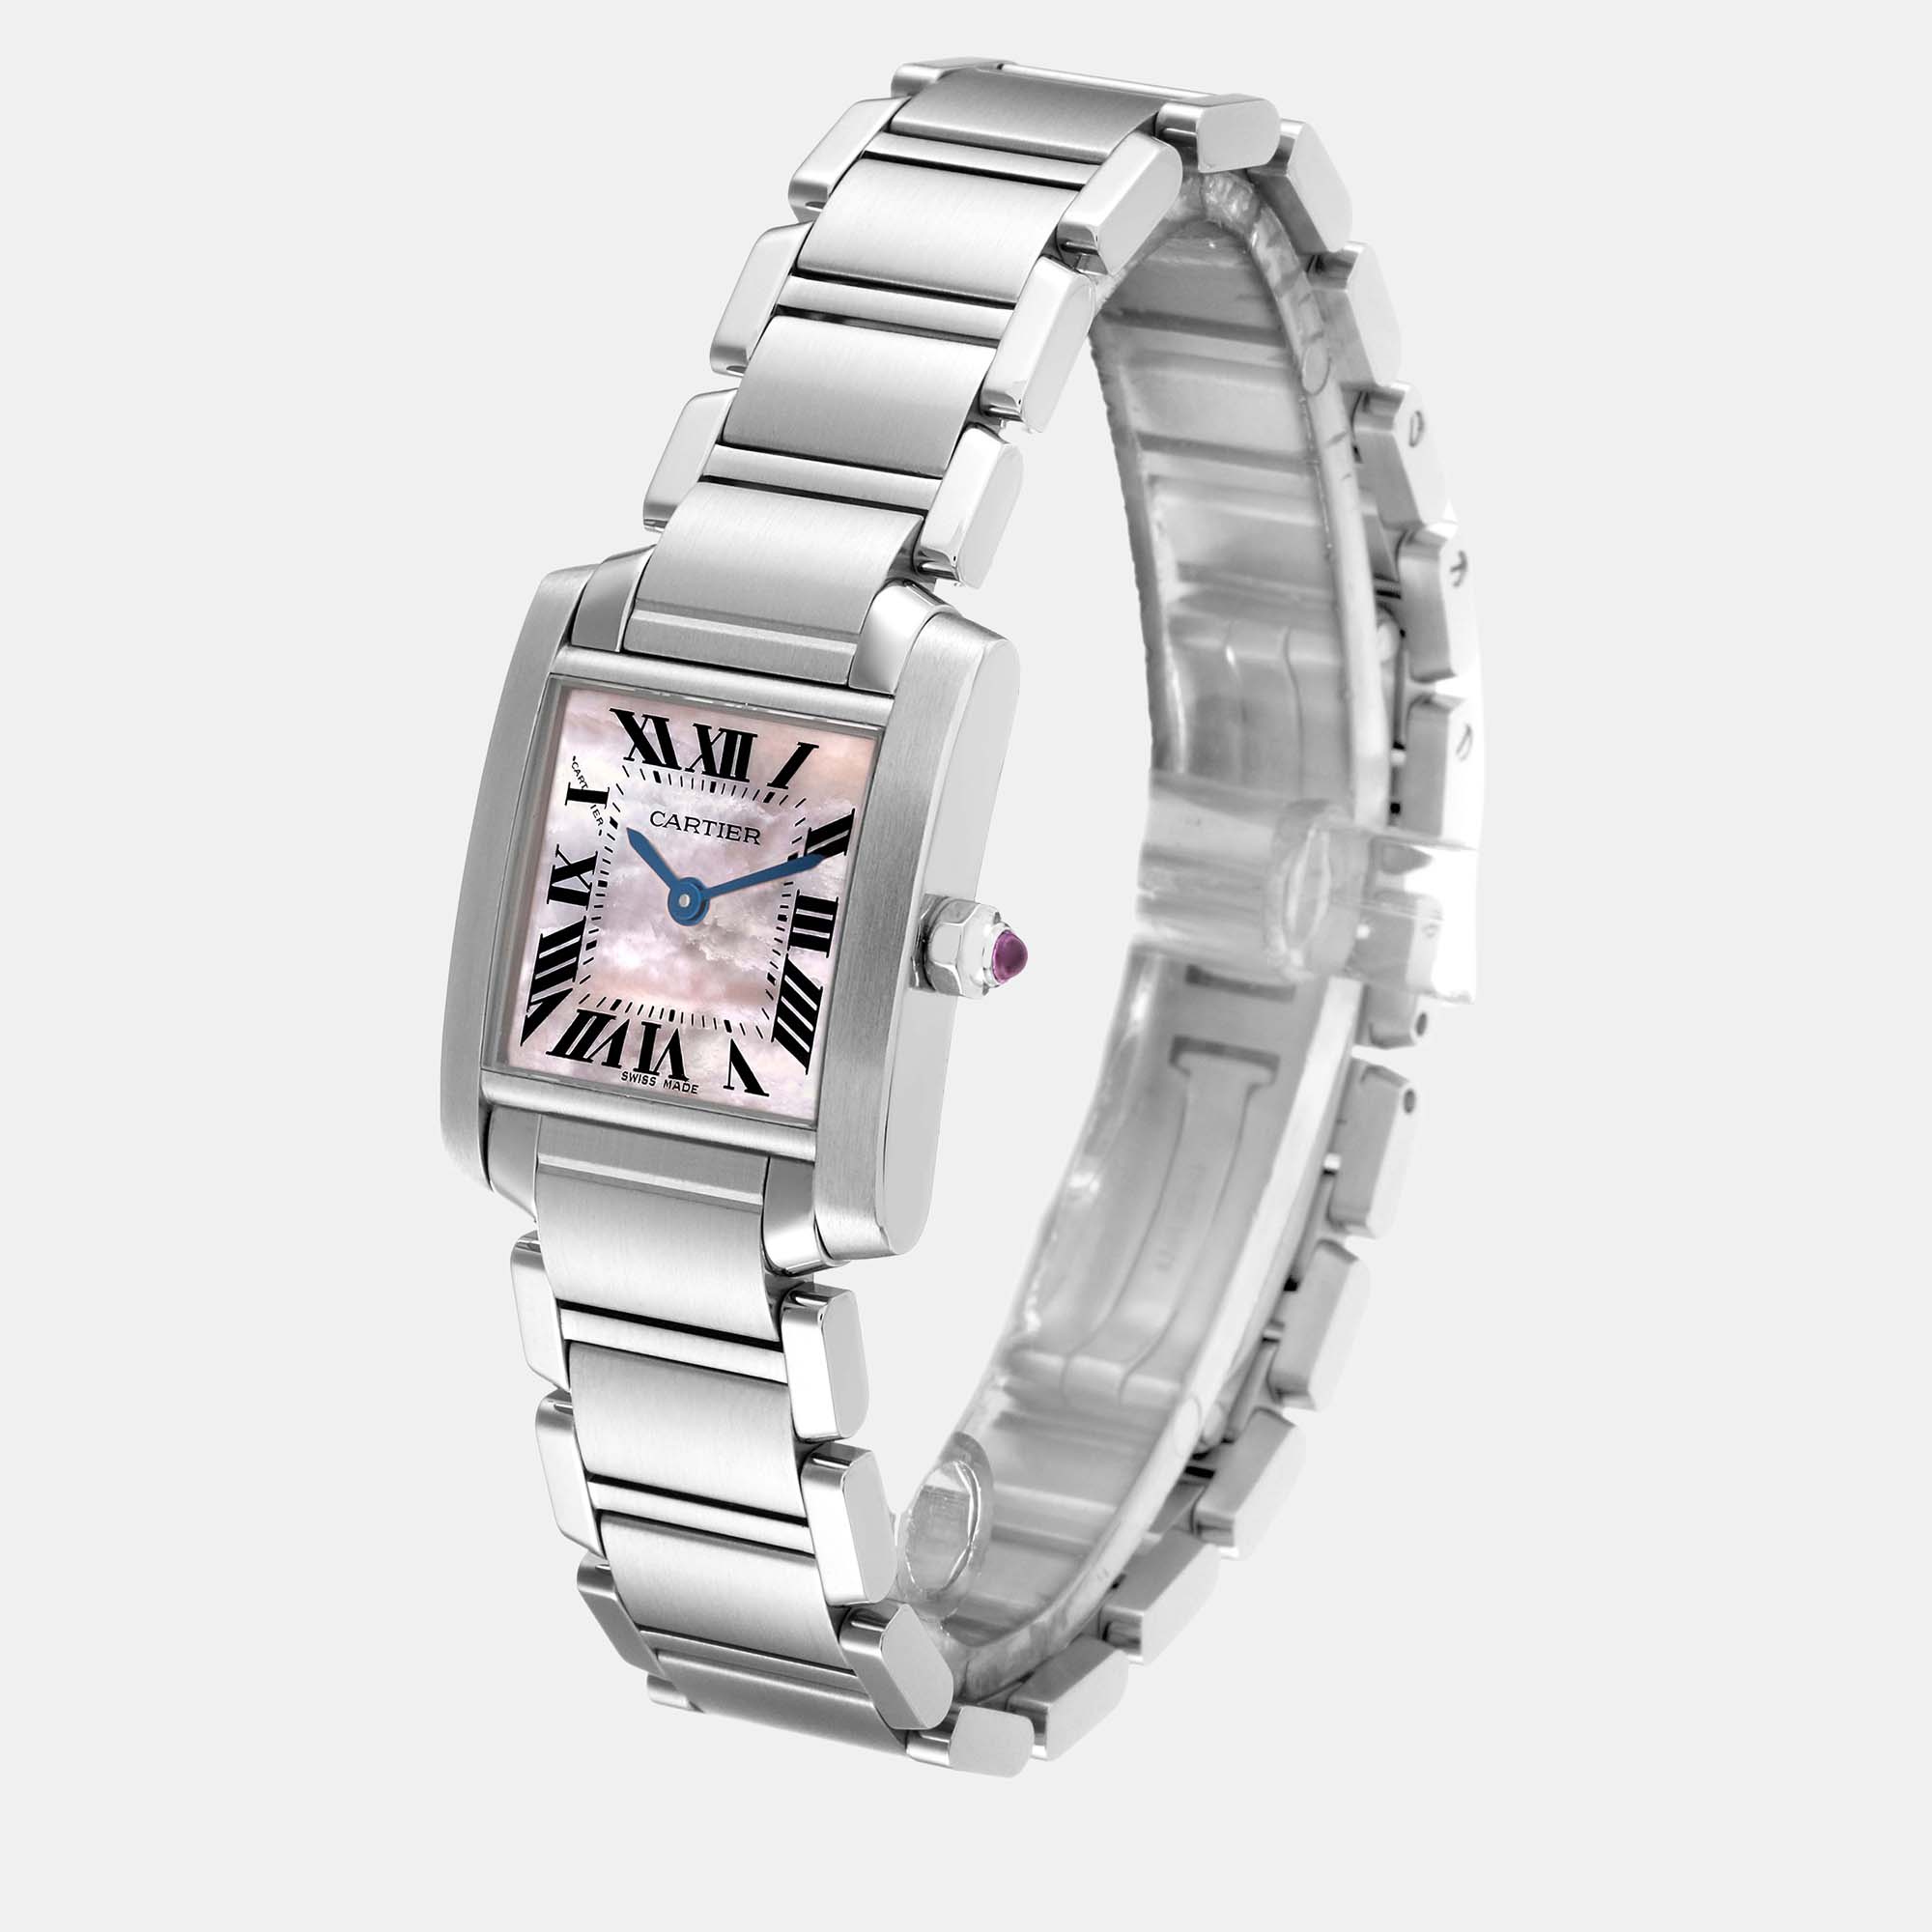 Cartier Tank Francaise Mother Of Pearl Dial Steel Ladies Watch W51028Q3 20.0 Mm X 25.0 Mm